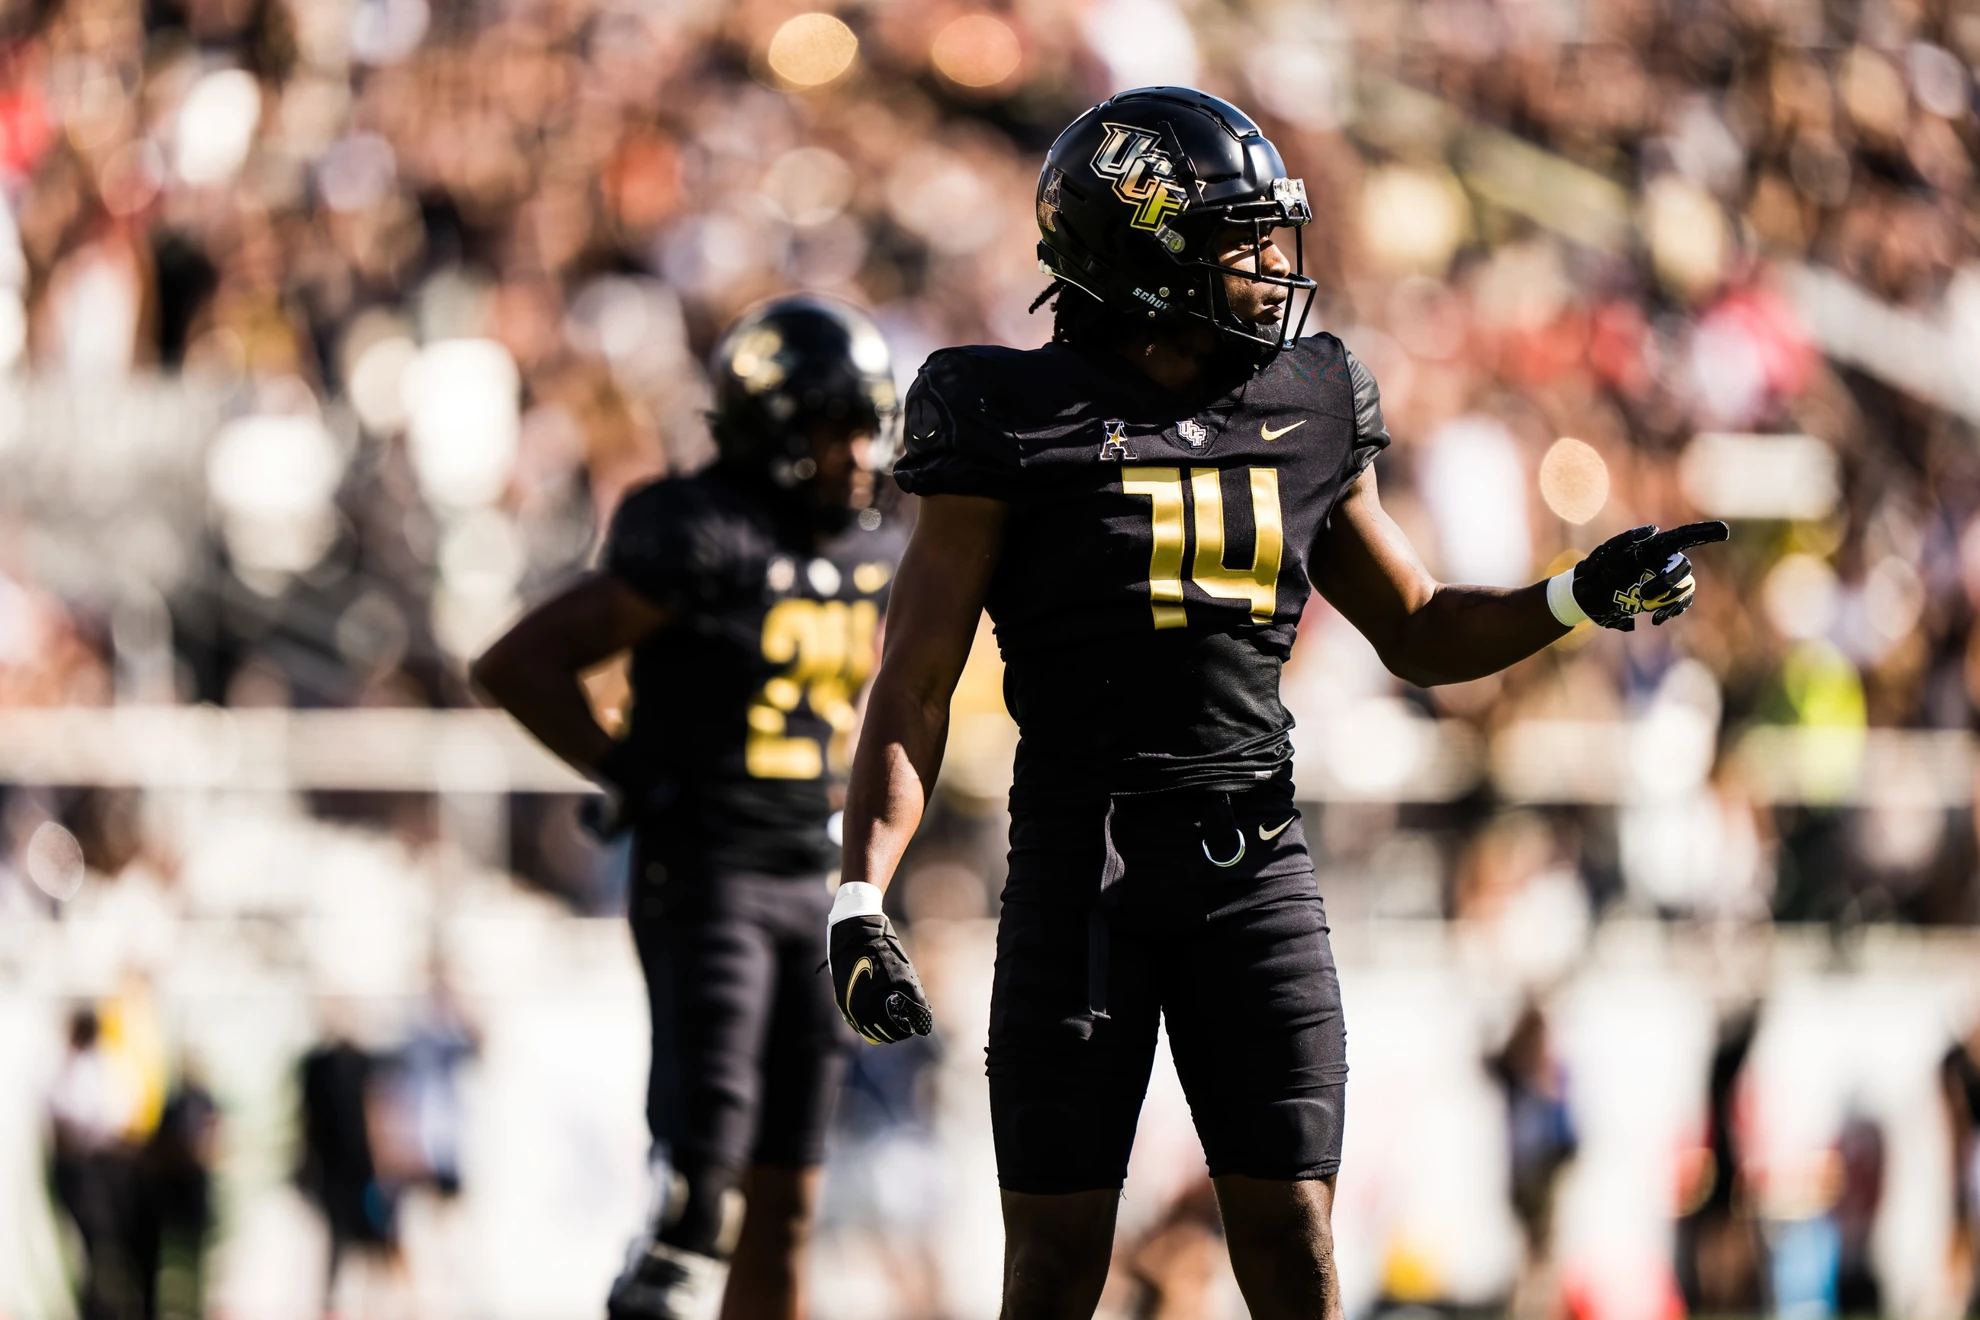 Corey Thornton utilizes his good size and physicality as a lockdown CB for UCF. Hula Bowl scout Justyce Gordon breaks down Thornton as an NFL Prospect in his report.